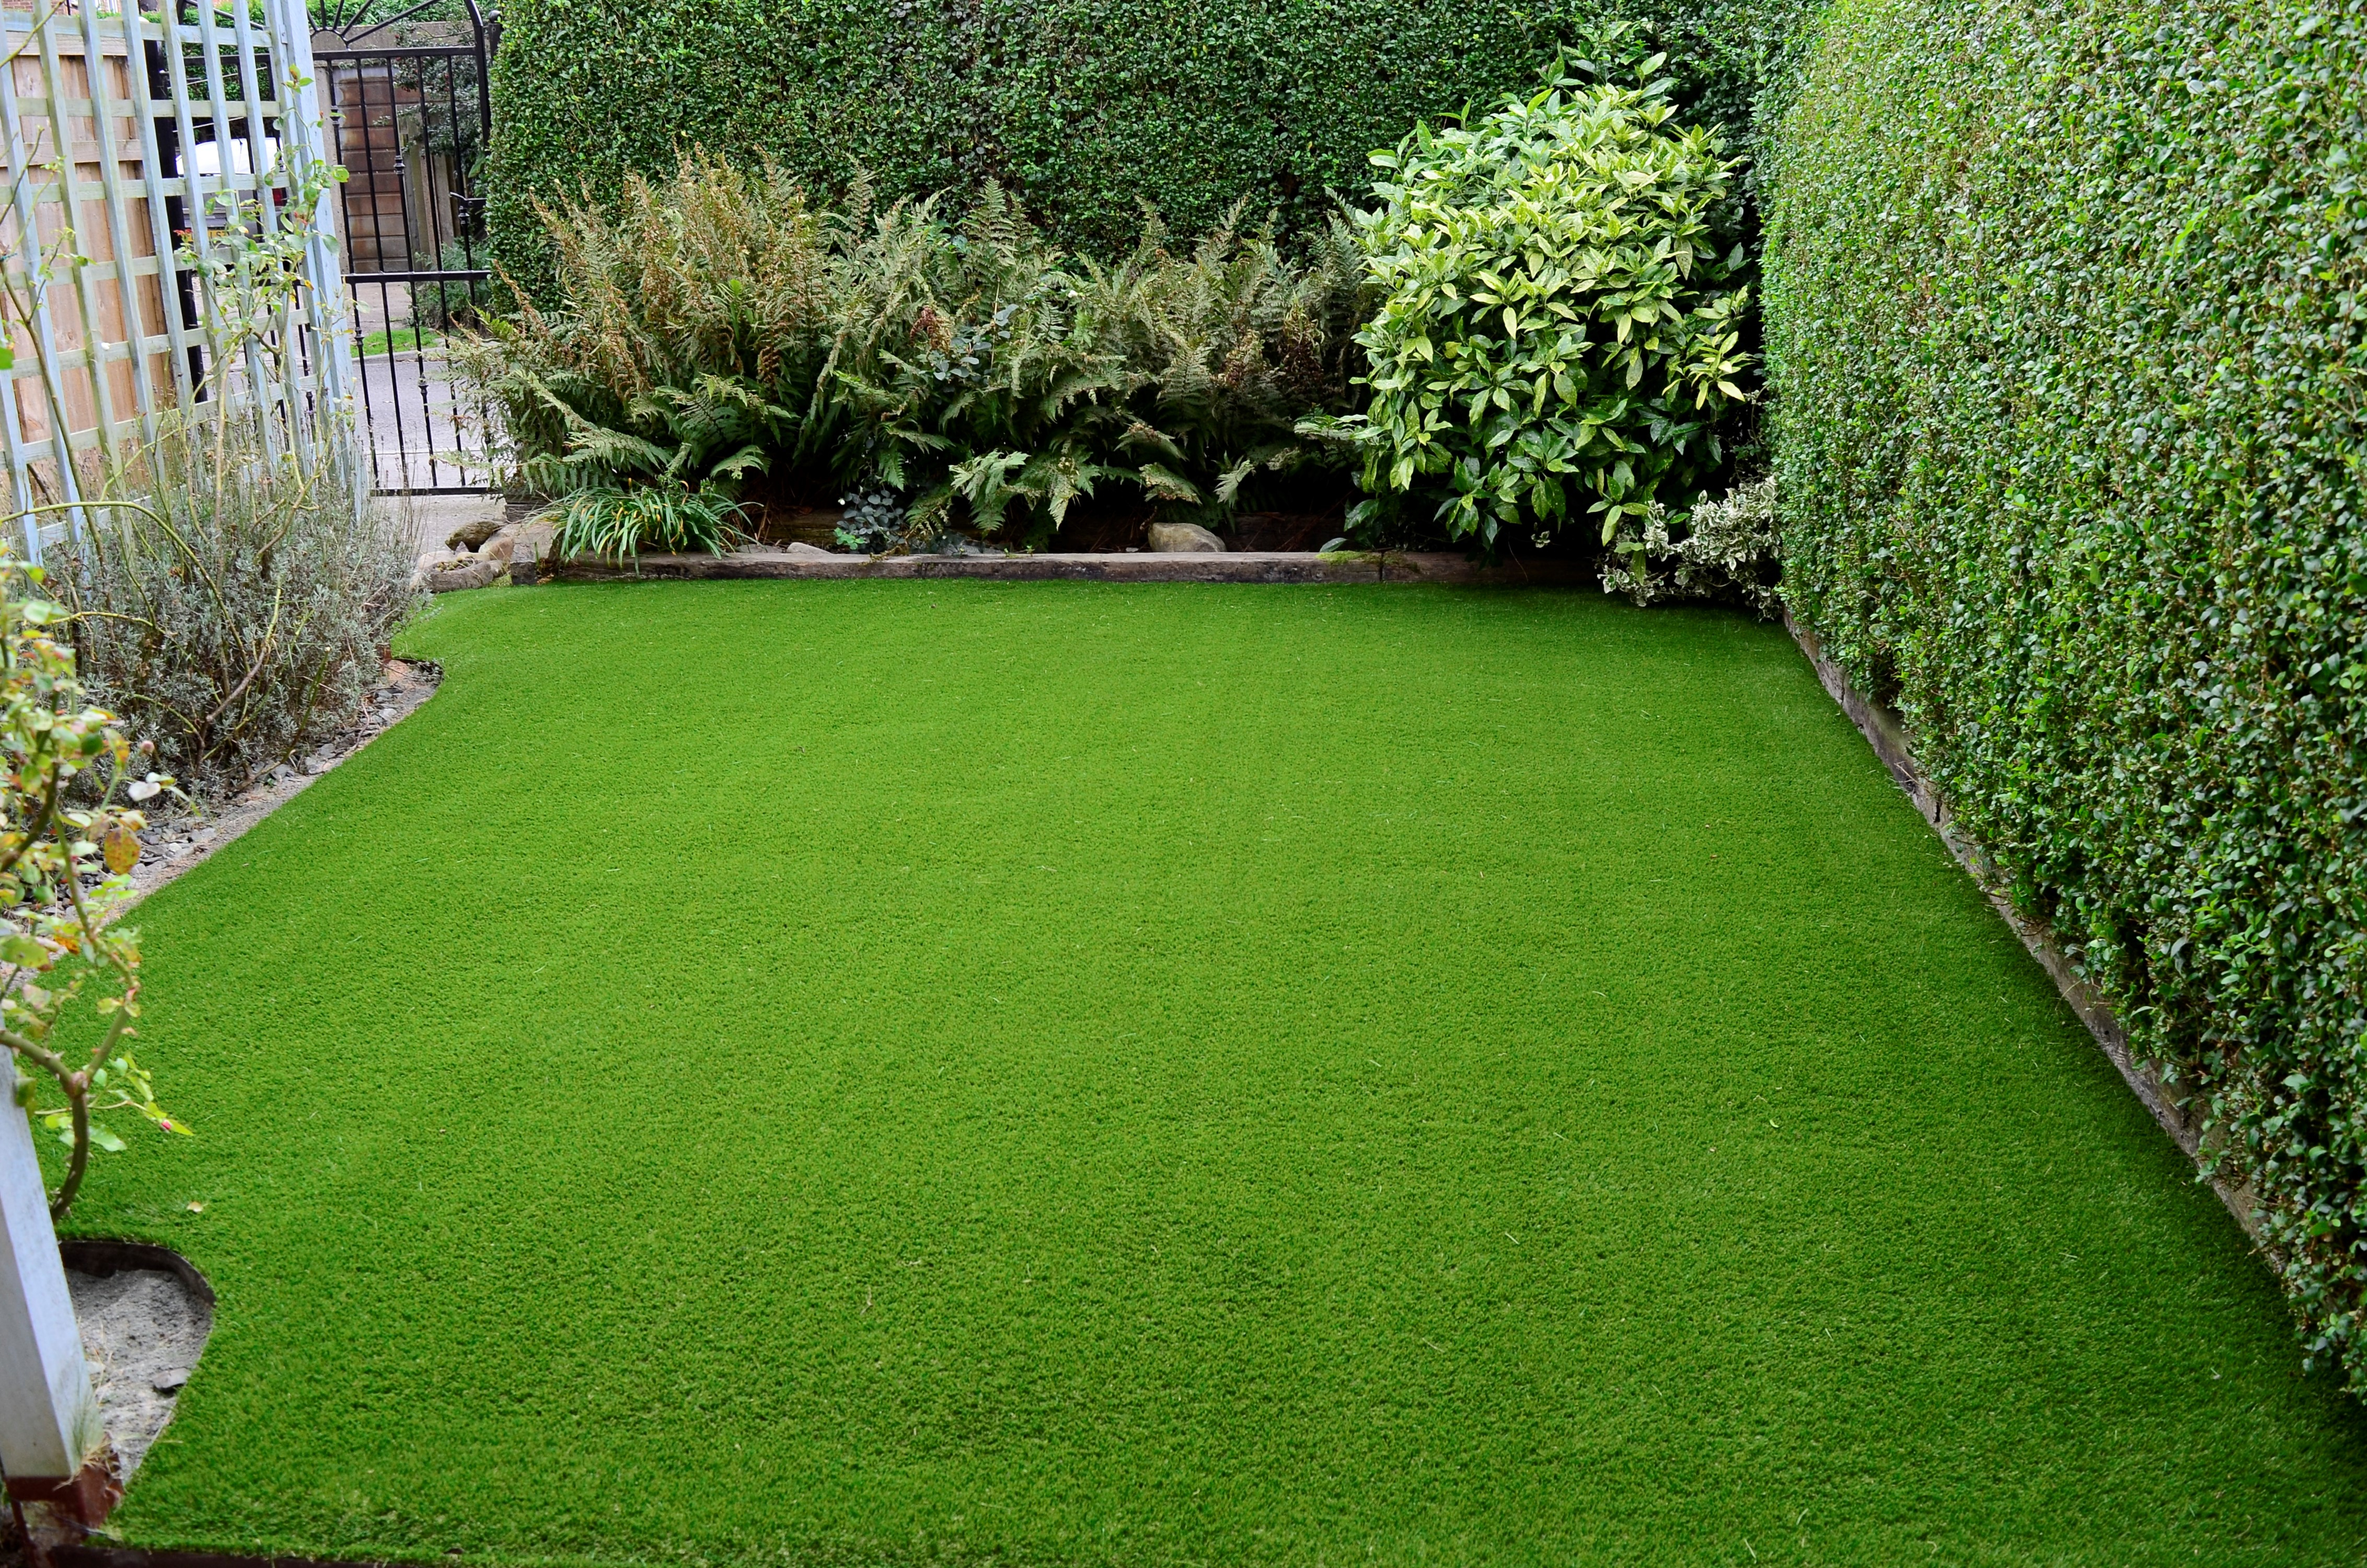 Artificial grass lawn with foliage